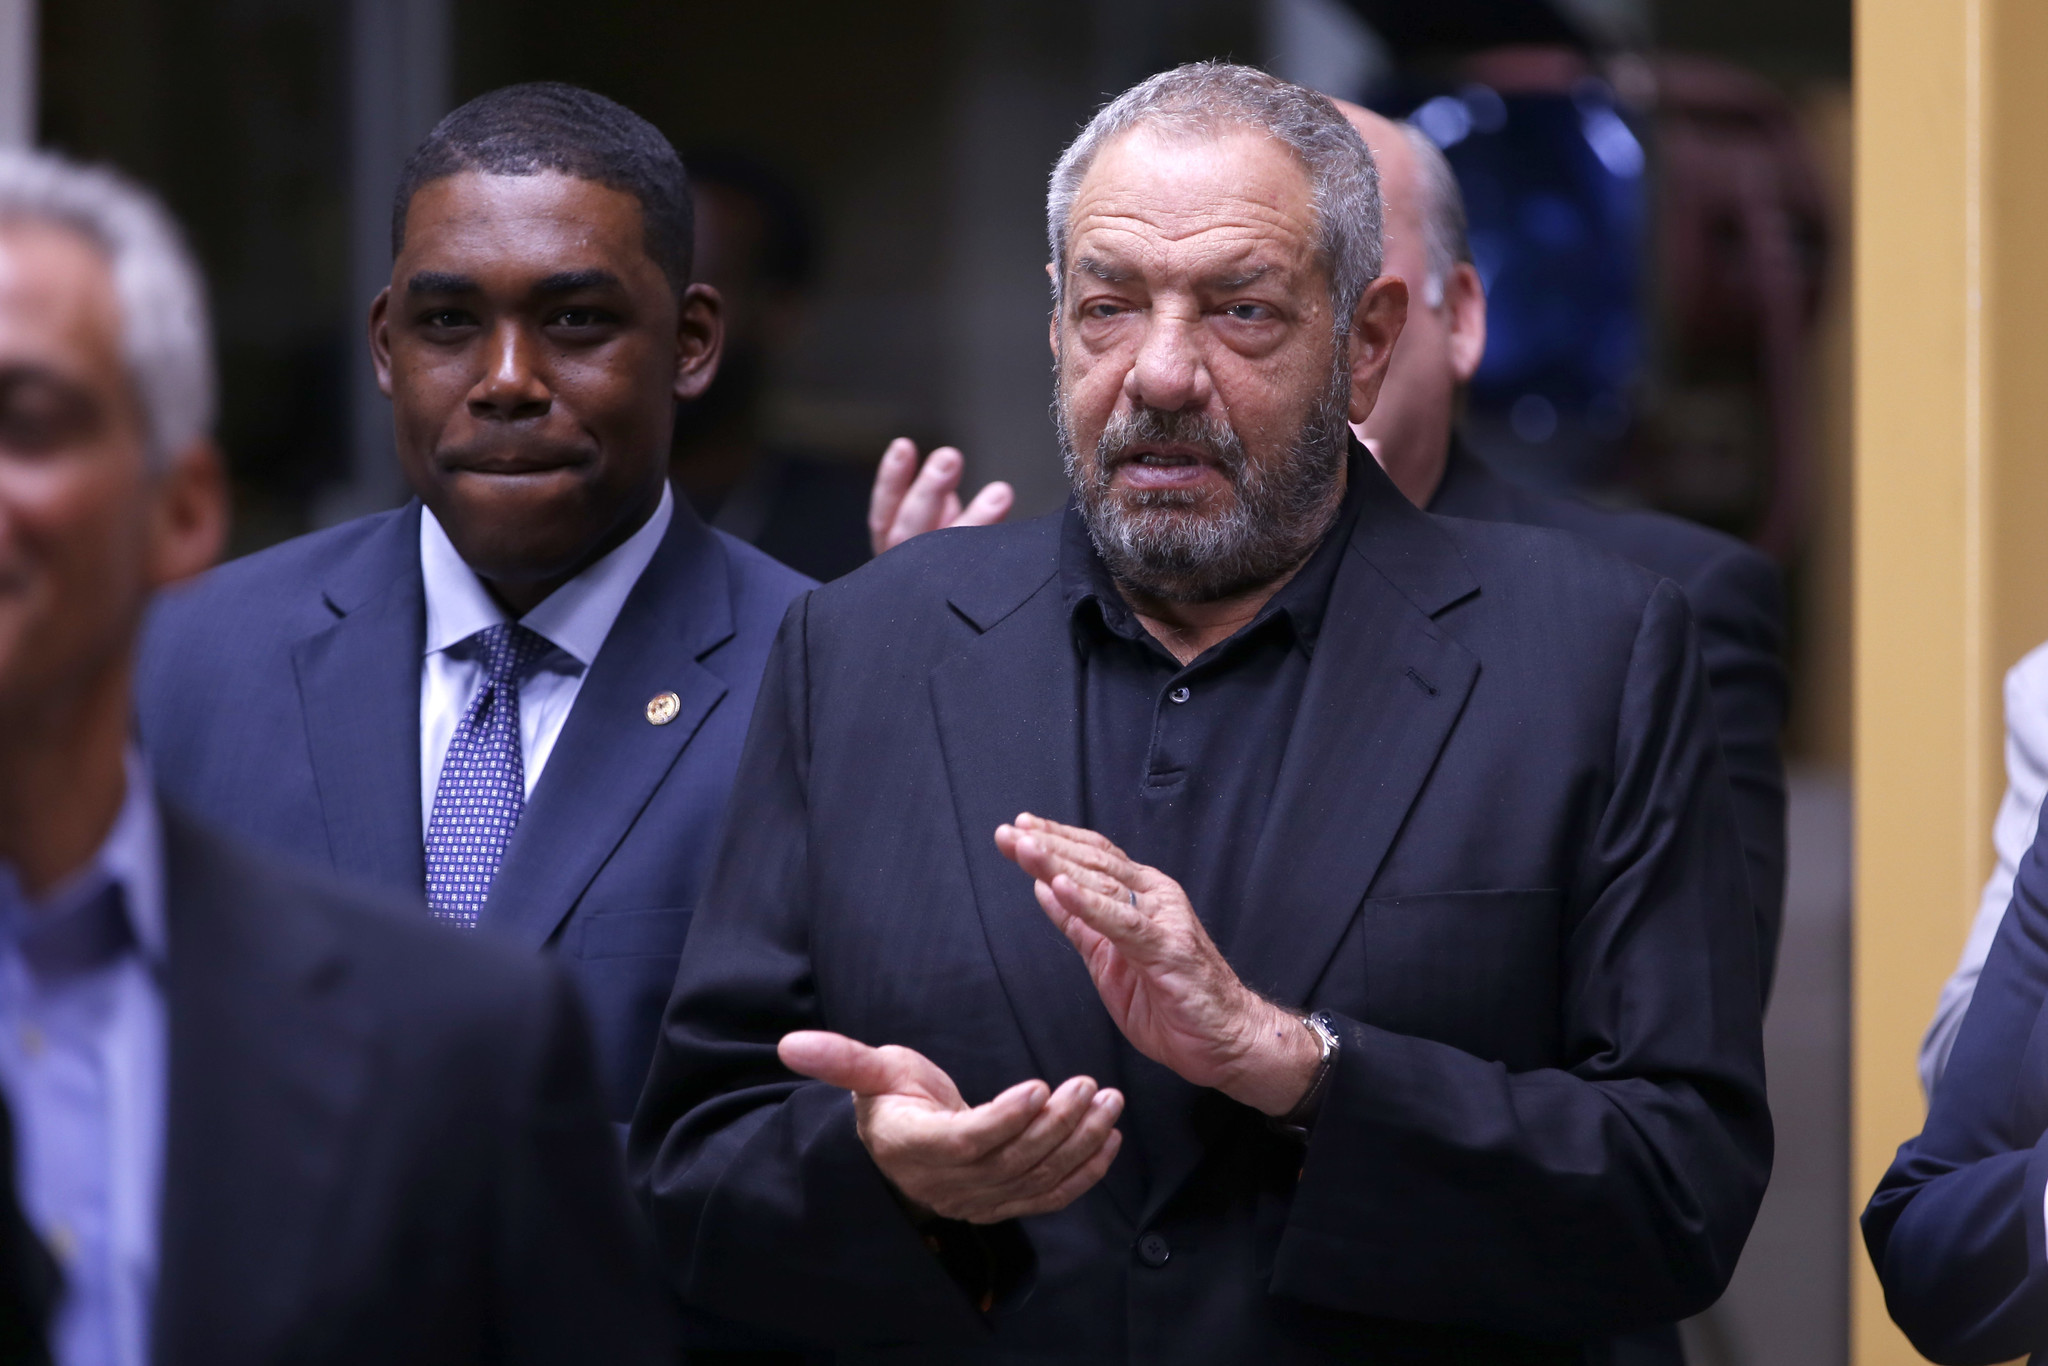 Dick Wolf lauds Chicago, insults its residents in West Side visit - Chicago Tribune2048 x 1366